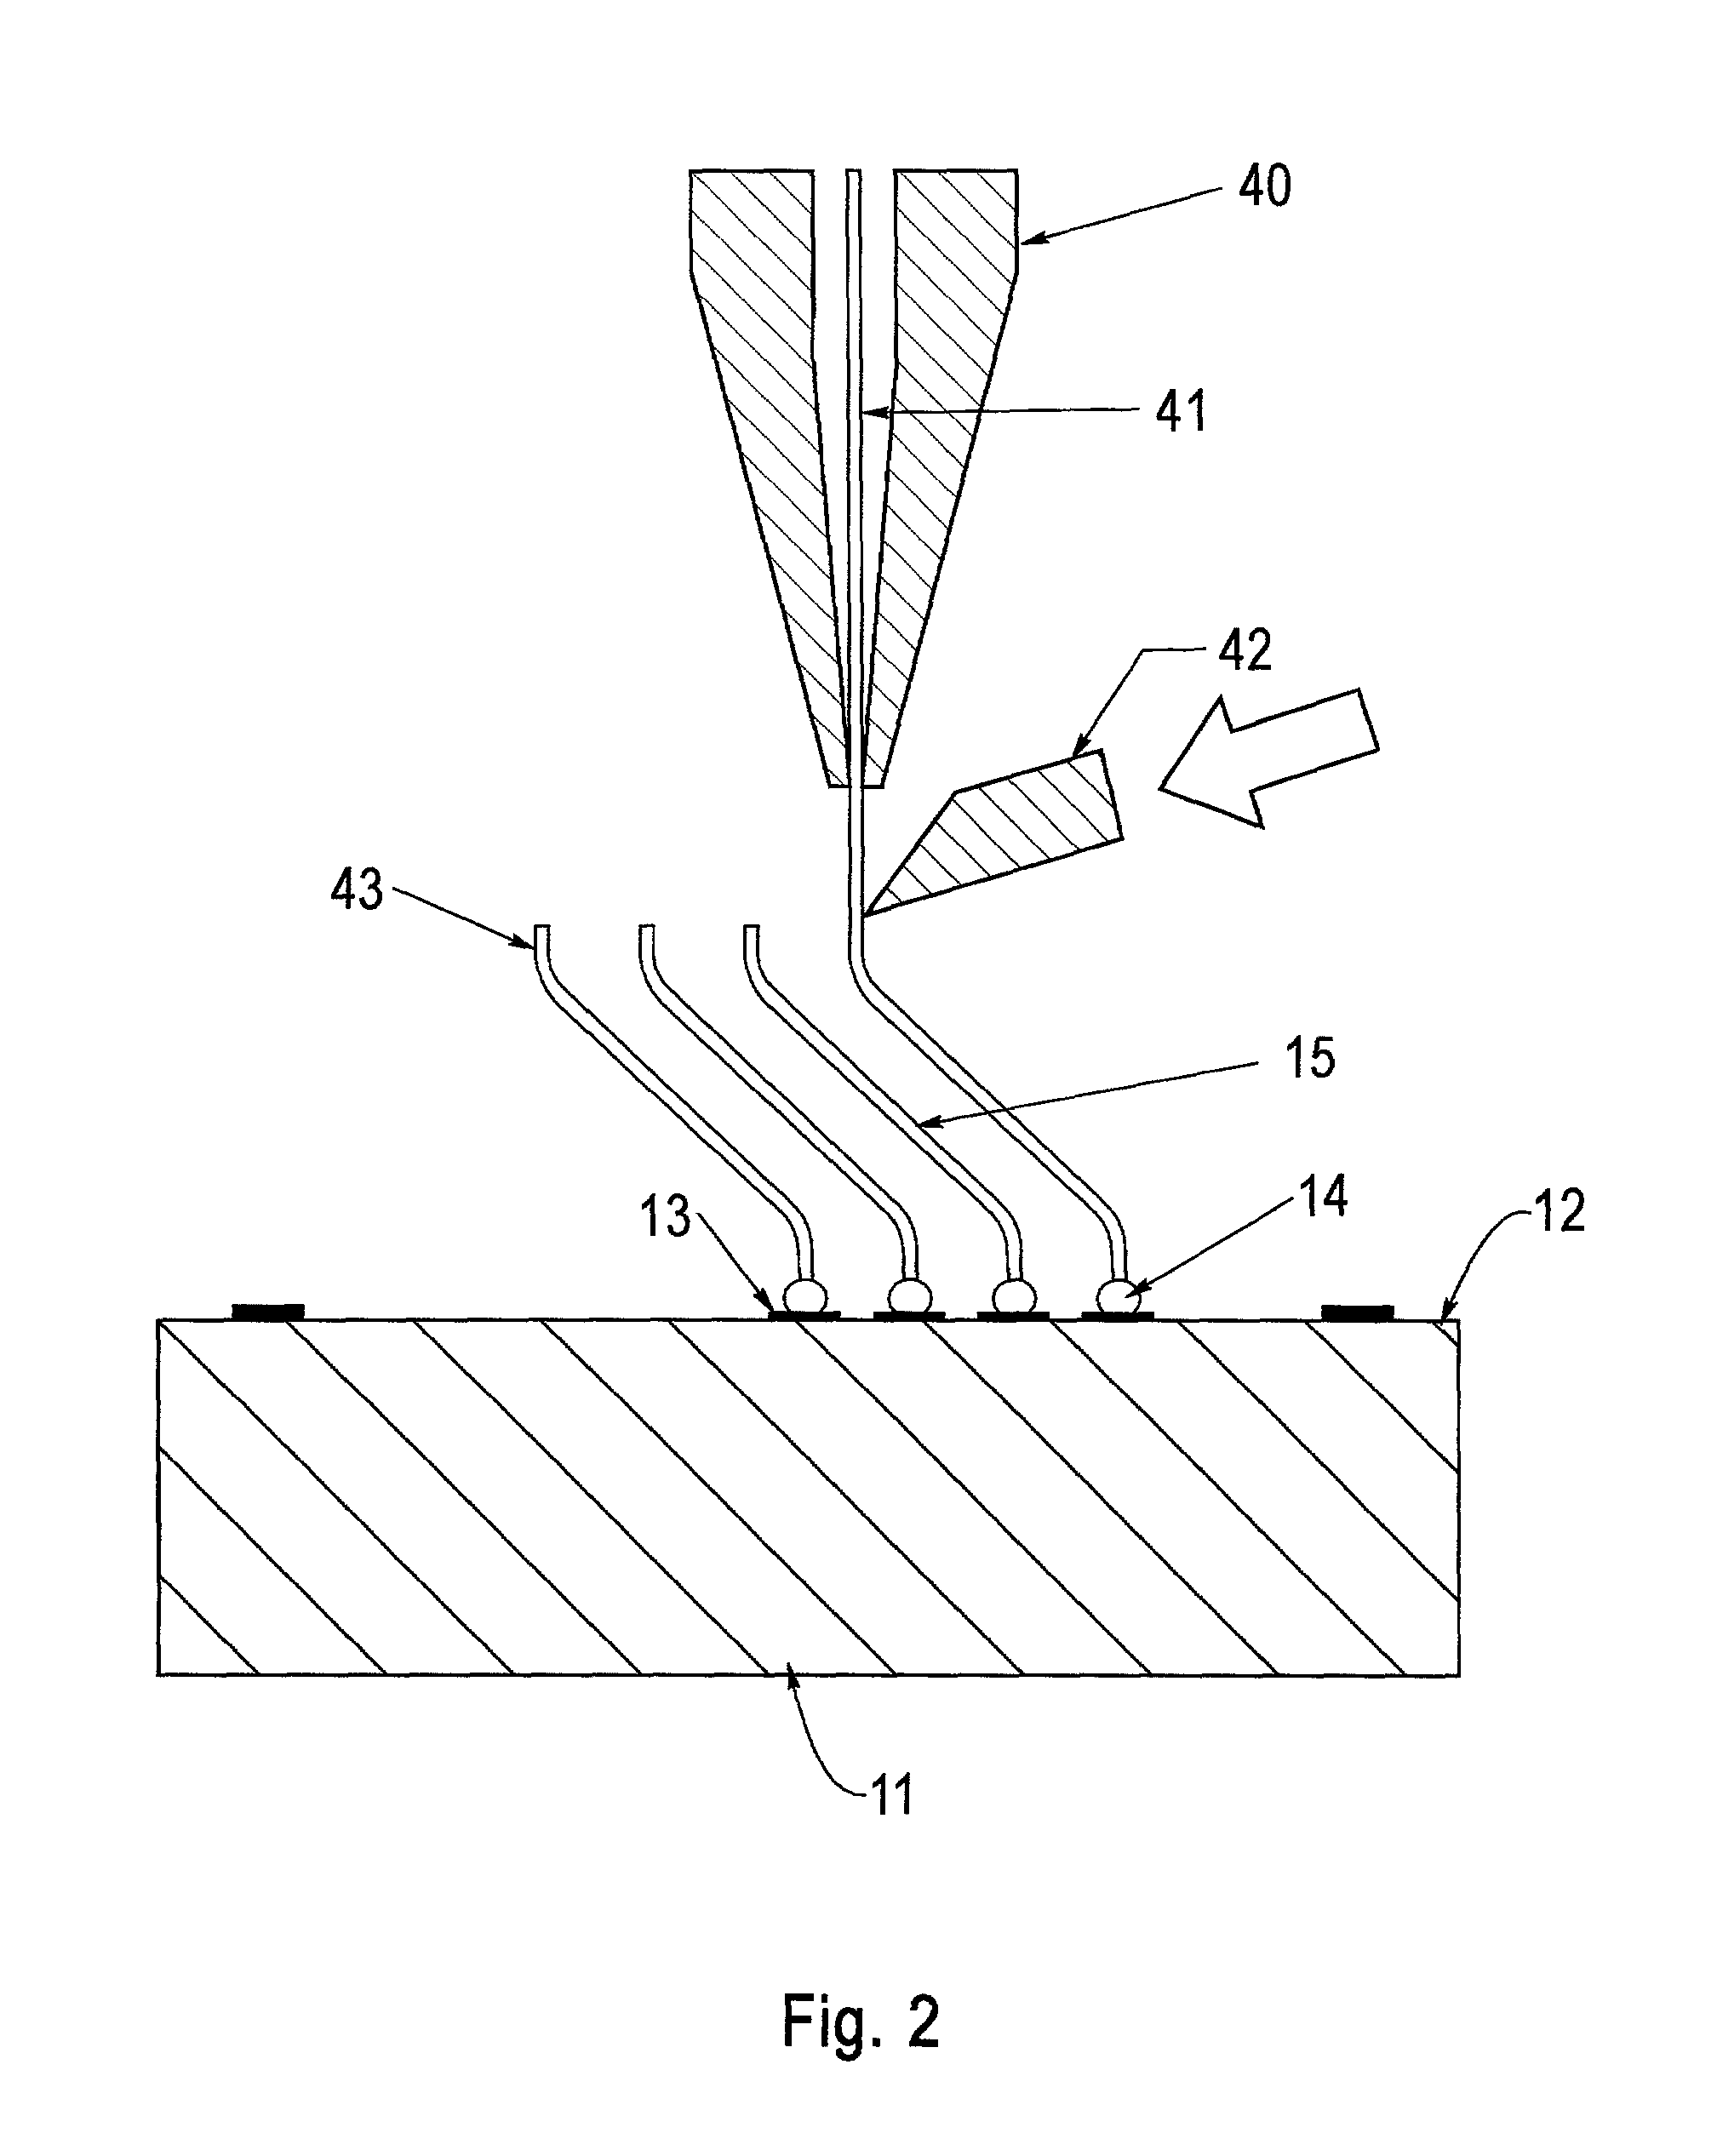 Electrodeposition method of forming a probe structure having a plurality of discrete insulated probe tips projecting from a support surface